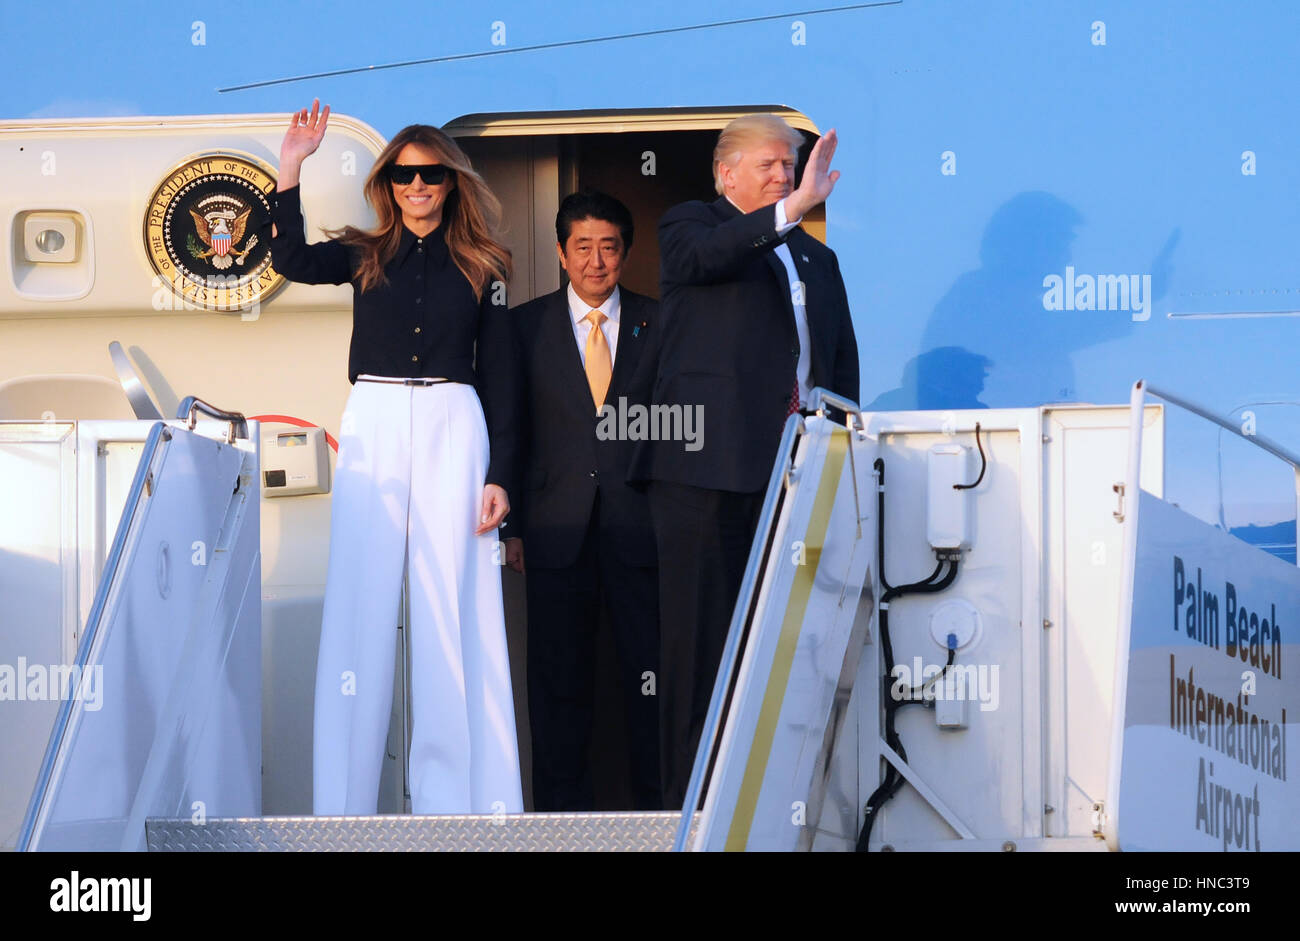 West Palm Beach, Florida, USA. 10th Feb, 2017. U.S. President Donald Trump (R) and First Lady Melania Trump (L) wave after arriving on Air Force One at Palm Beach International Airport in Florida on February 10, 2017. Trump was also accompanied by Japanese Prime Minister Shinzo Abe (center) and his wife, Akie Abe. President Trump invited the Japanese leader to spend the weekend at Trump's Mar-A-Lago estate in Palm Beach, Florida, dubbed the 'Winter White House', where they will hold meetings and play golf. Credit: Paul Hennessy/Alamy Live News Stock Photo